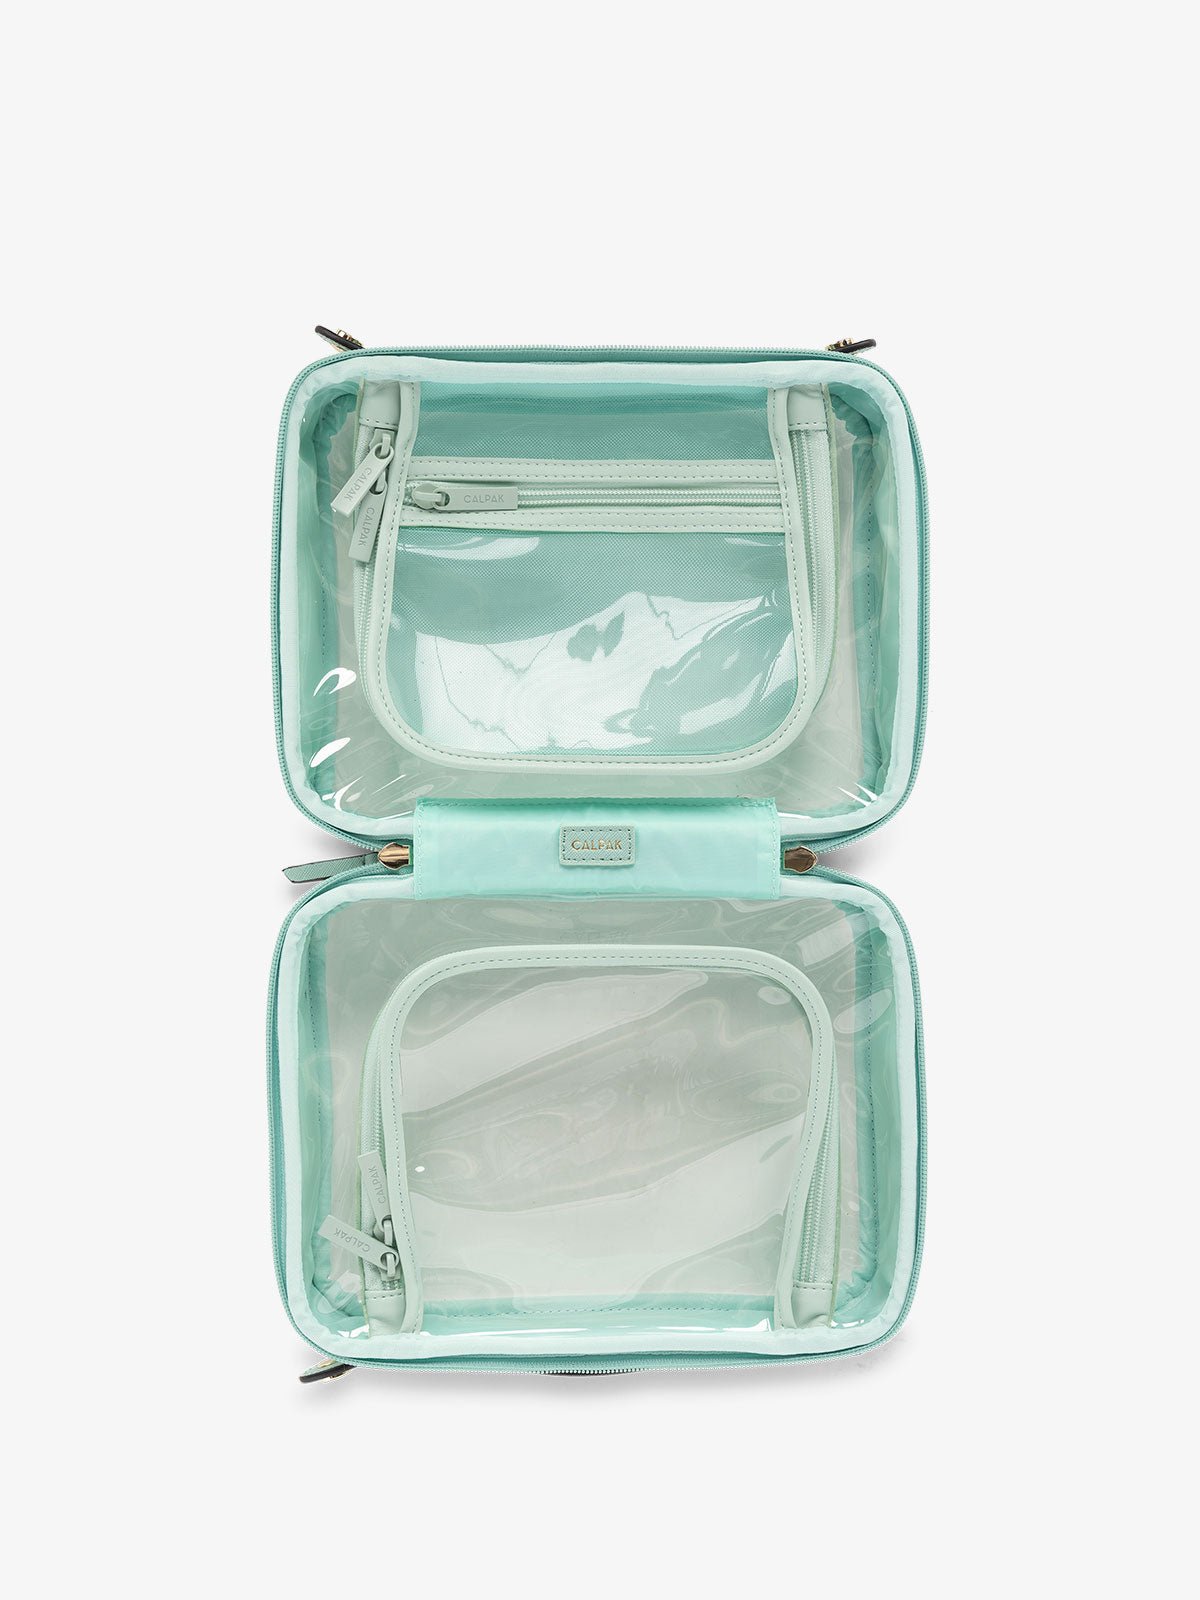 CALPAK clear travel makeup bag with zippered compartments in light blue